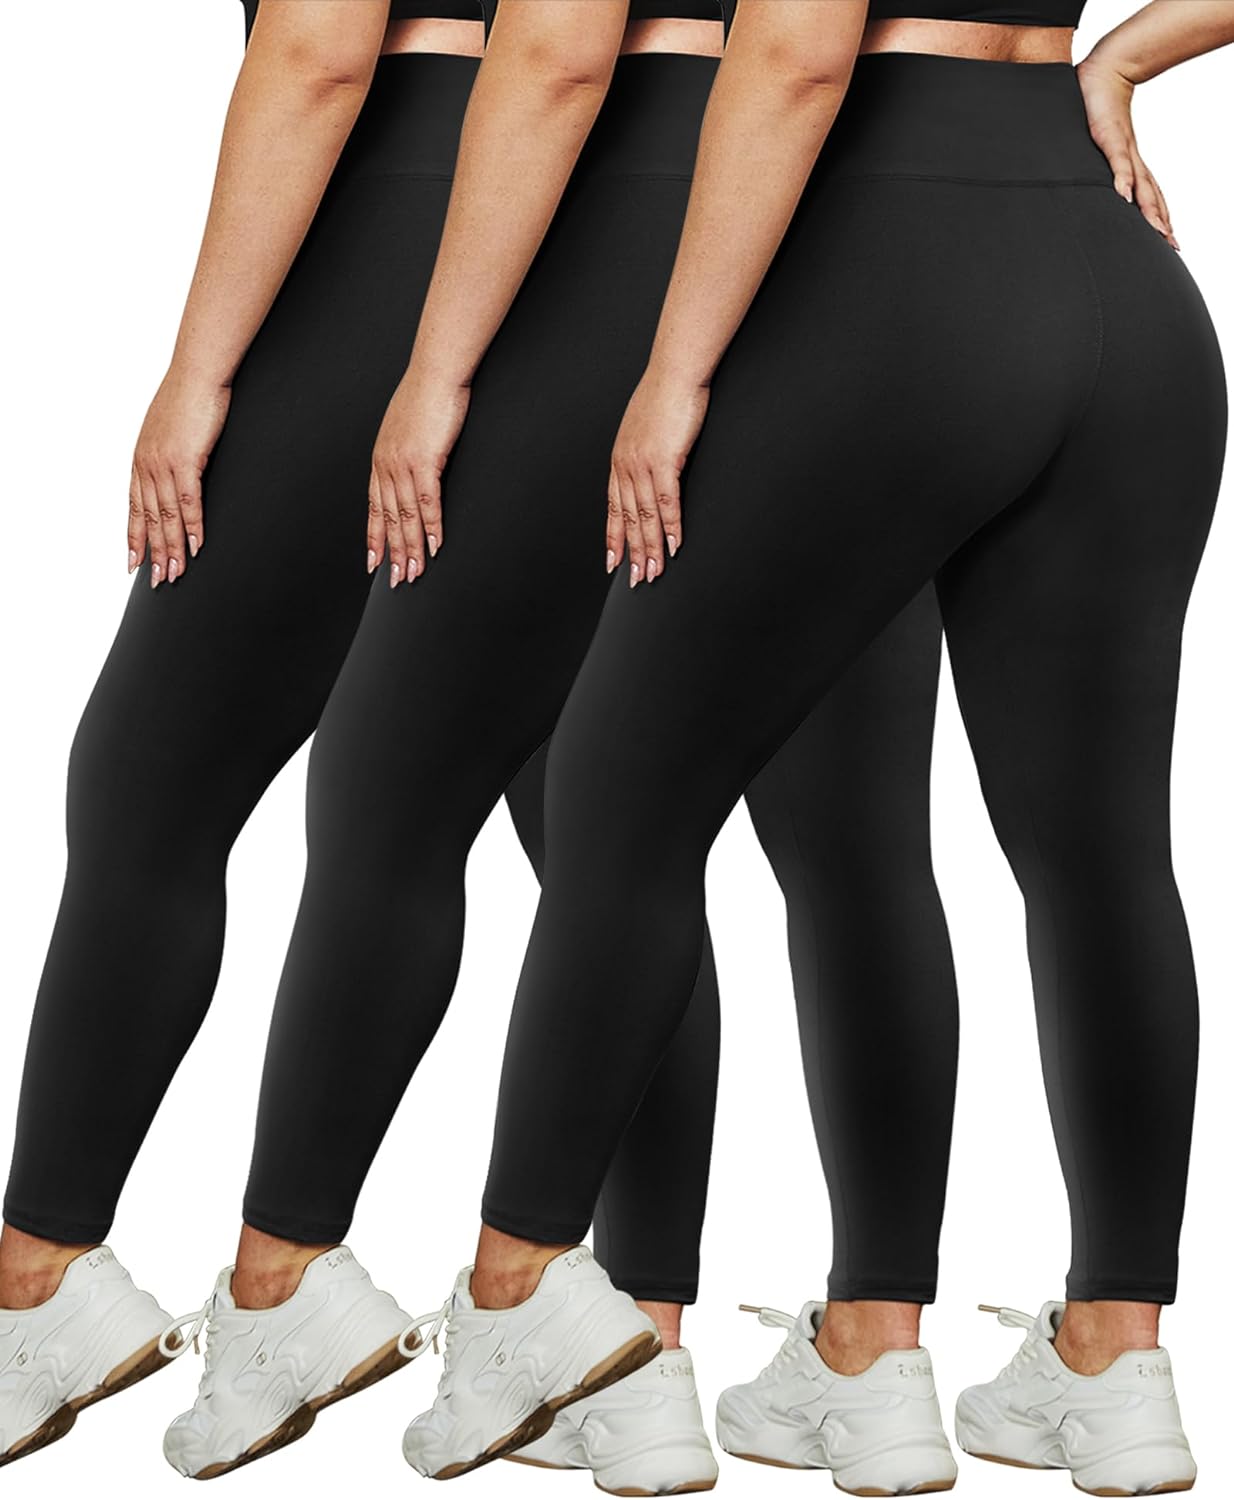 HLTPRO 3 Pack Plus Size Leggings for Women(X-Large - 4X)- High Waist Stretchy Buttery Soft Pants for Workout Running Yoga